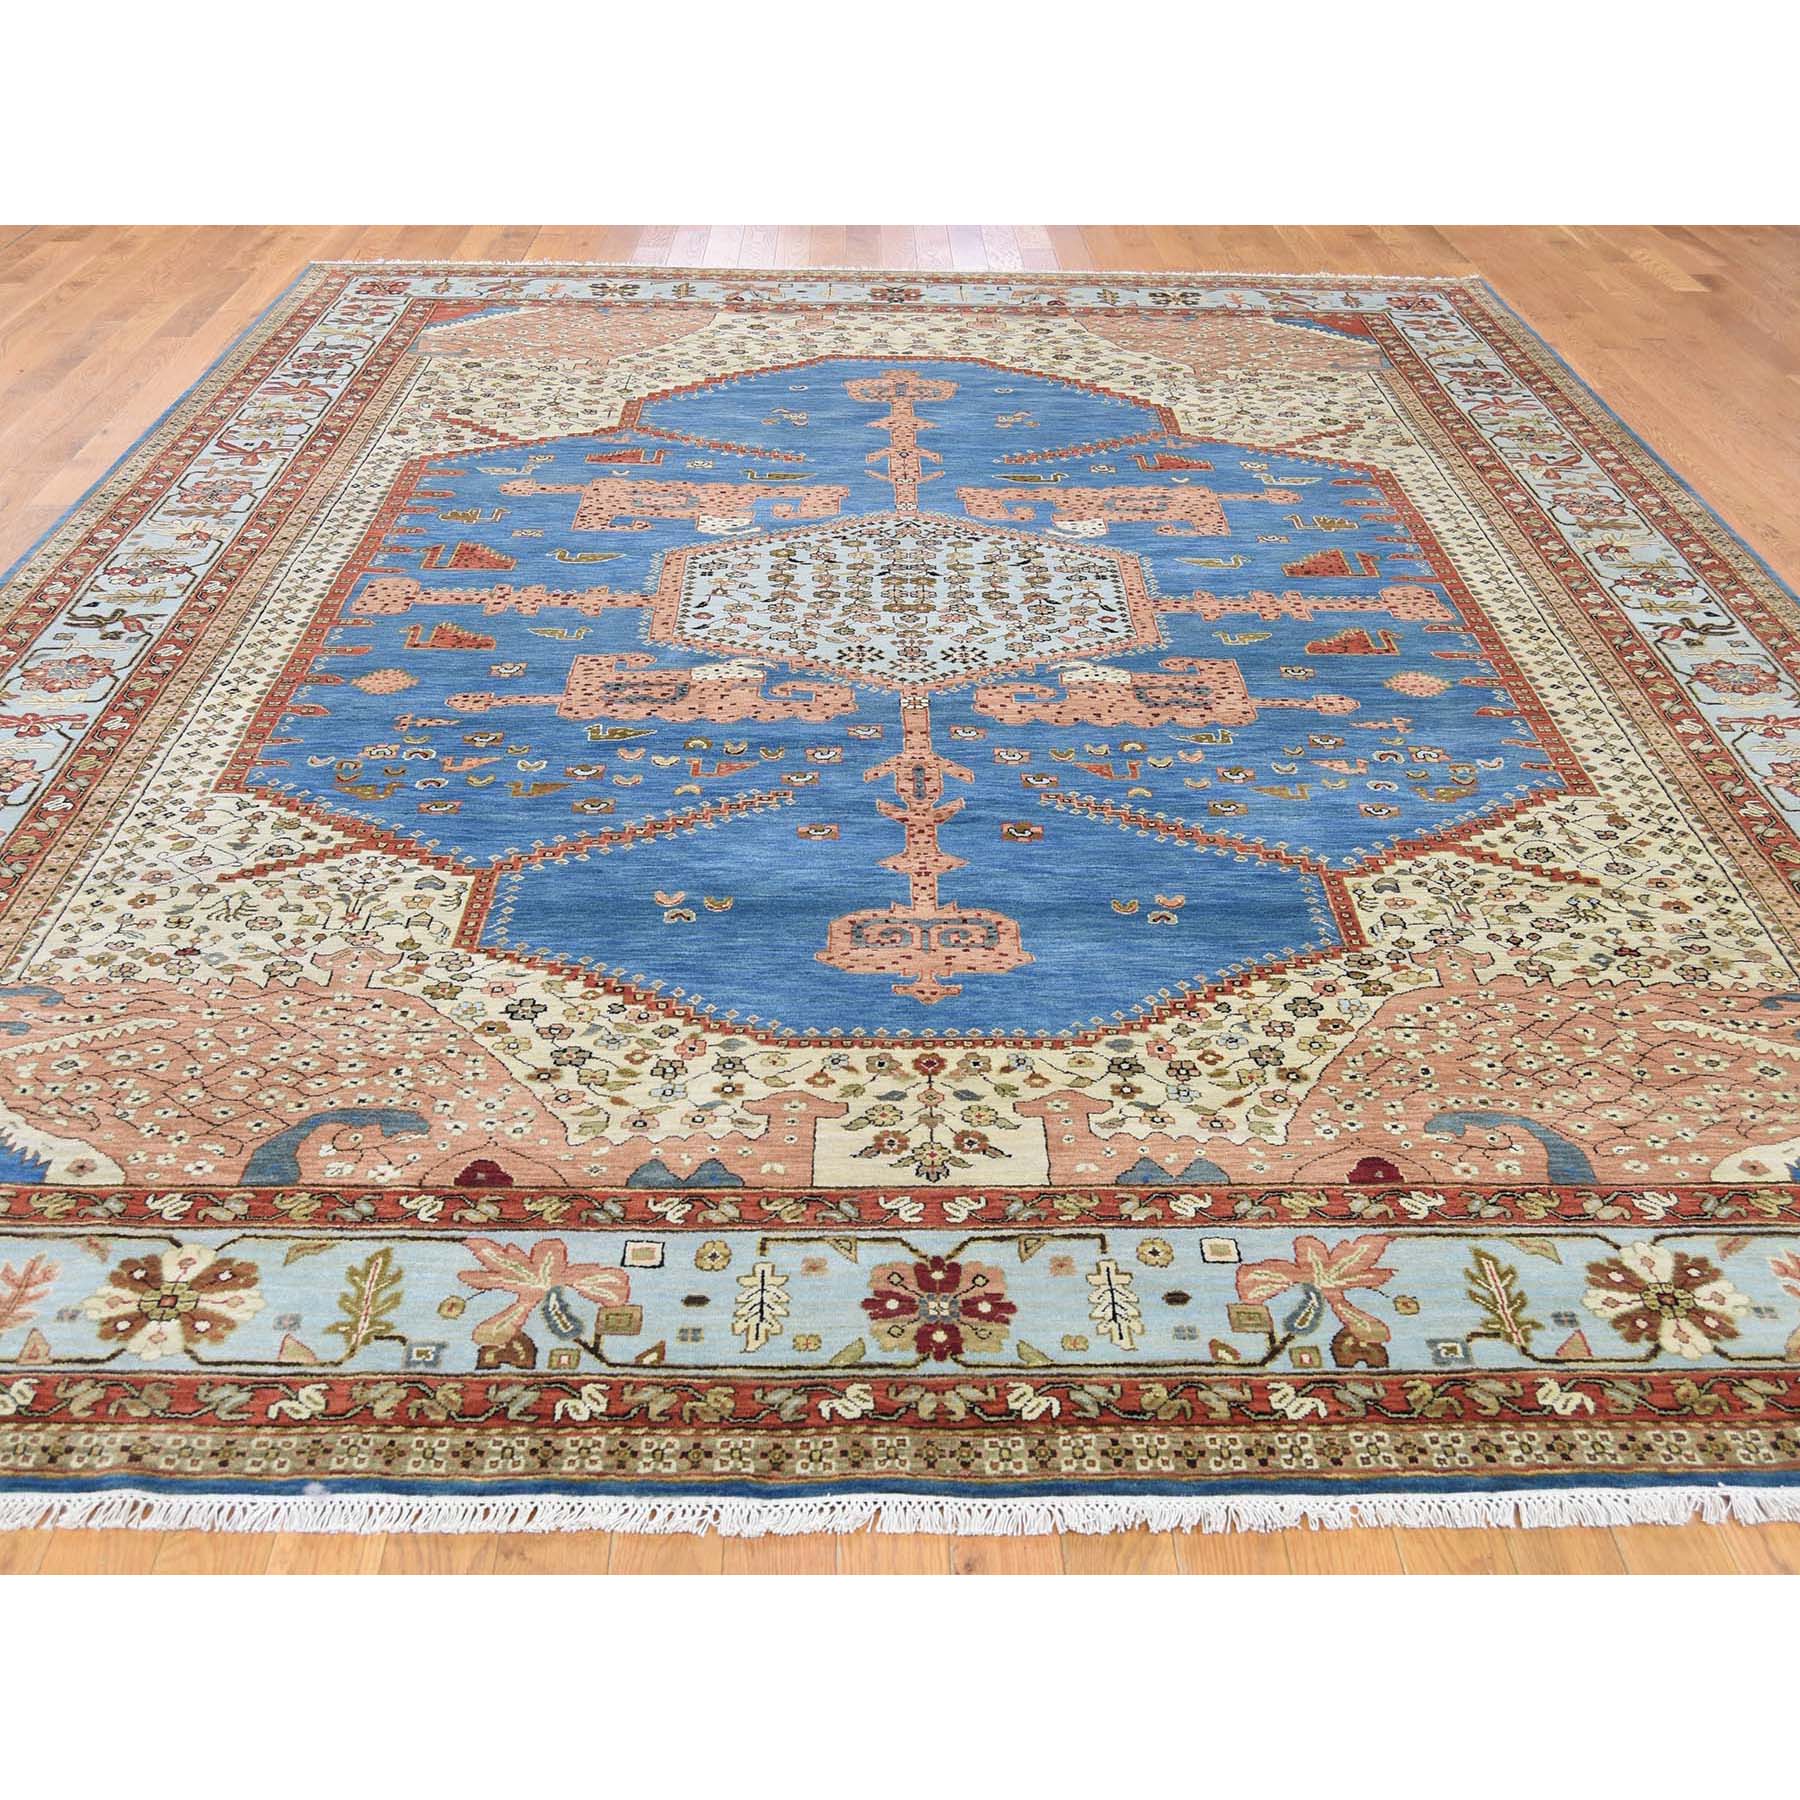 9-1 x11-8  Pure Wool Vegetable Dyes Bakshaish Hand-Knotted Oriental Rug 